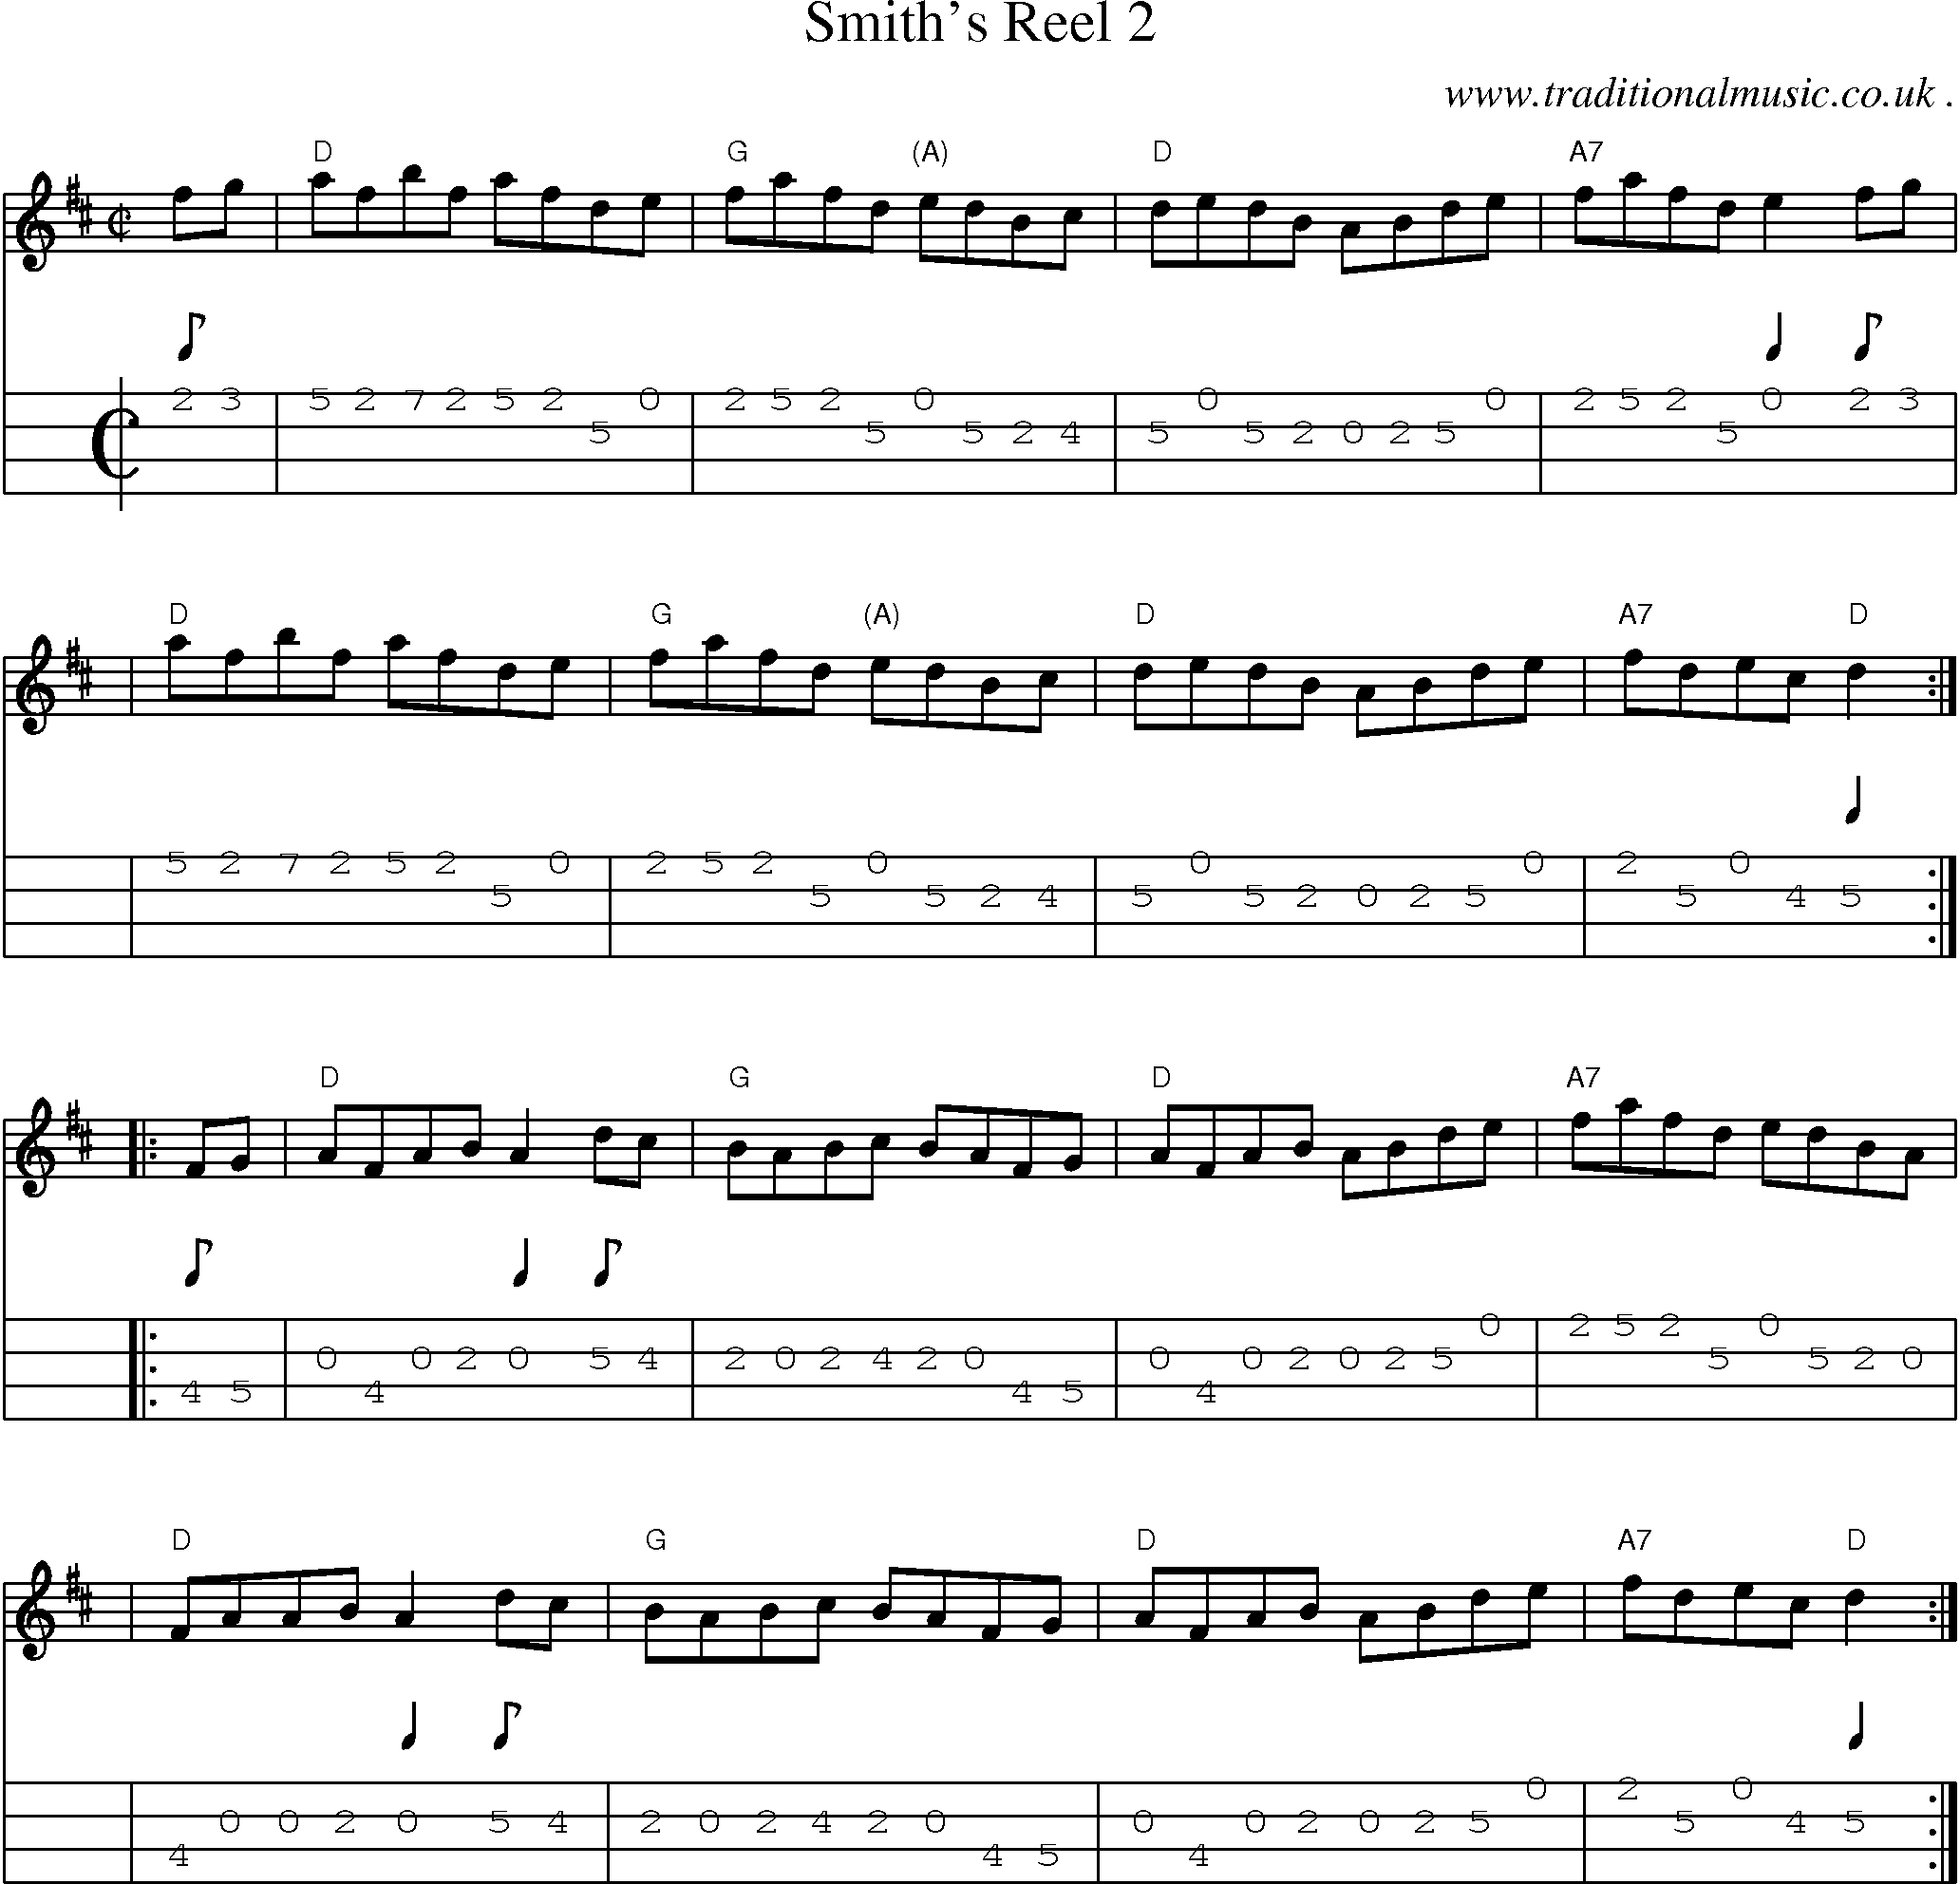 Music Score and Mandolin Tabs for Smiths Reel 2